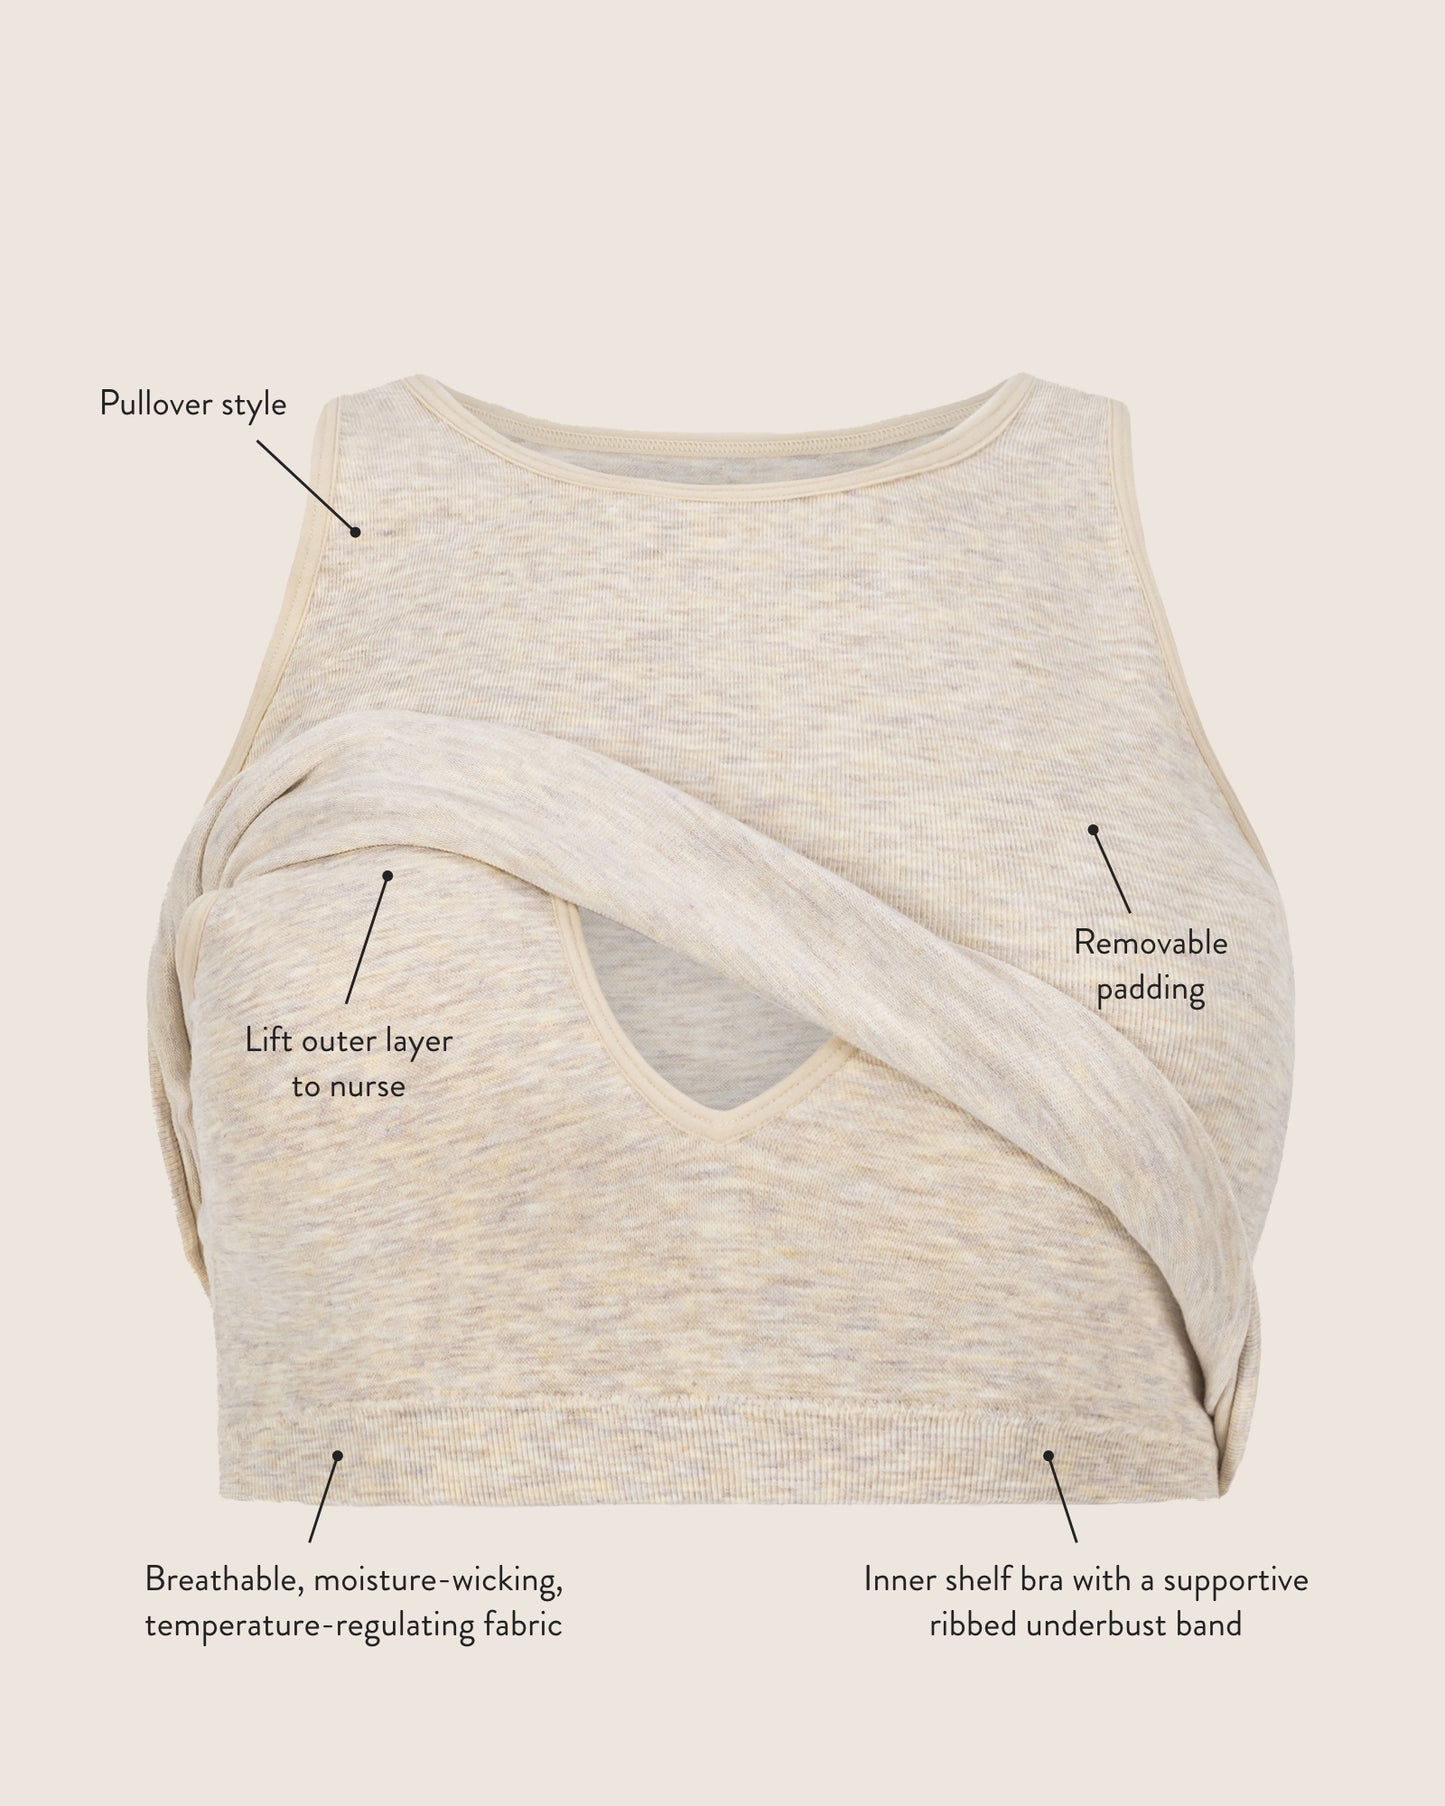 Infographic image of unique features of the Sublime Bamboo Maternity & Nursing Longline Bra. Call-outs include Removable padding, breathable & moisture wicking fabric plus a supportive inner shelf and underbust band. 